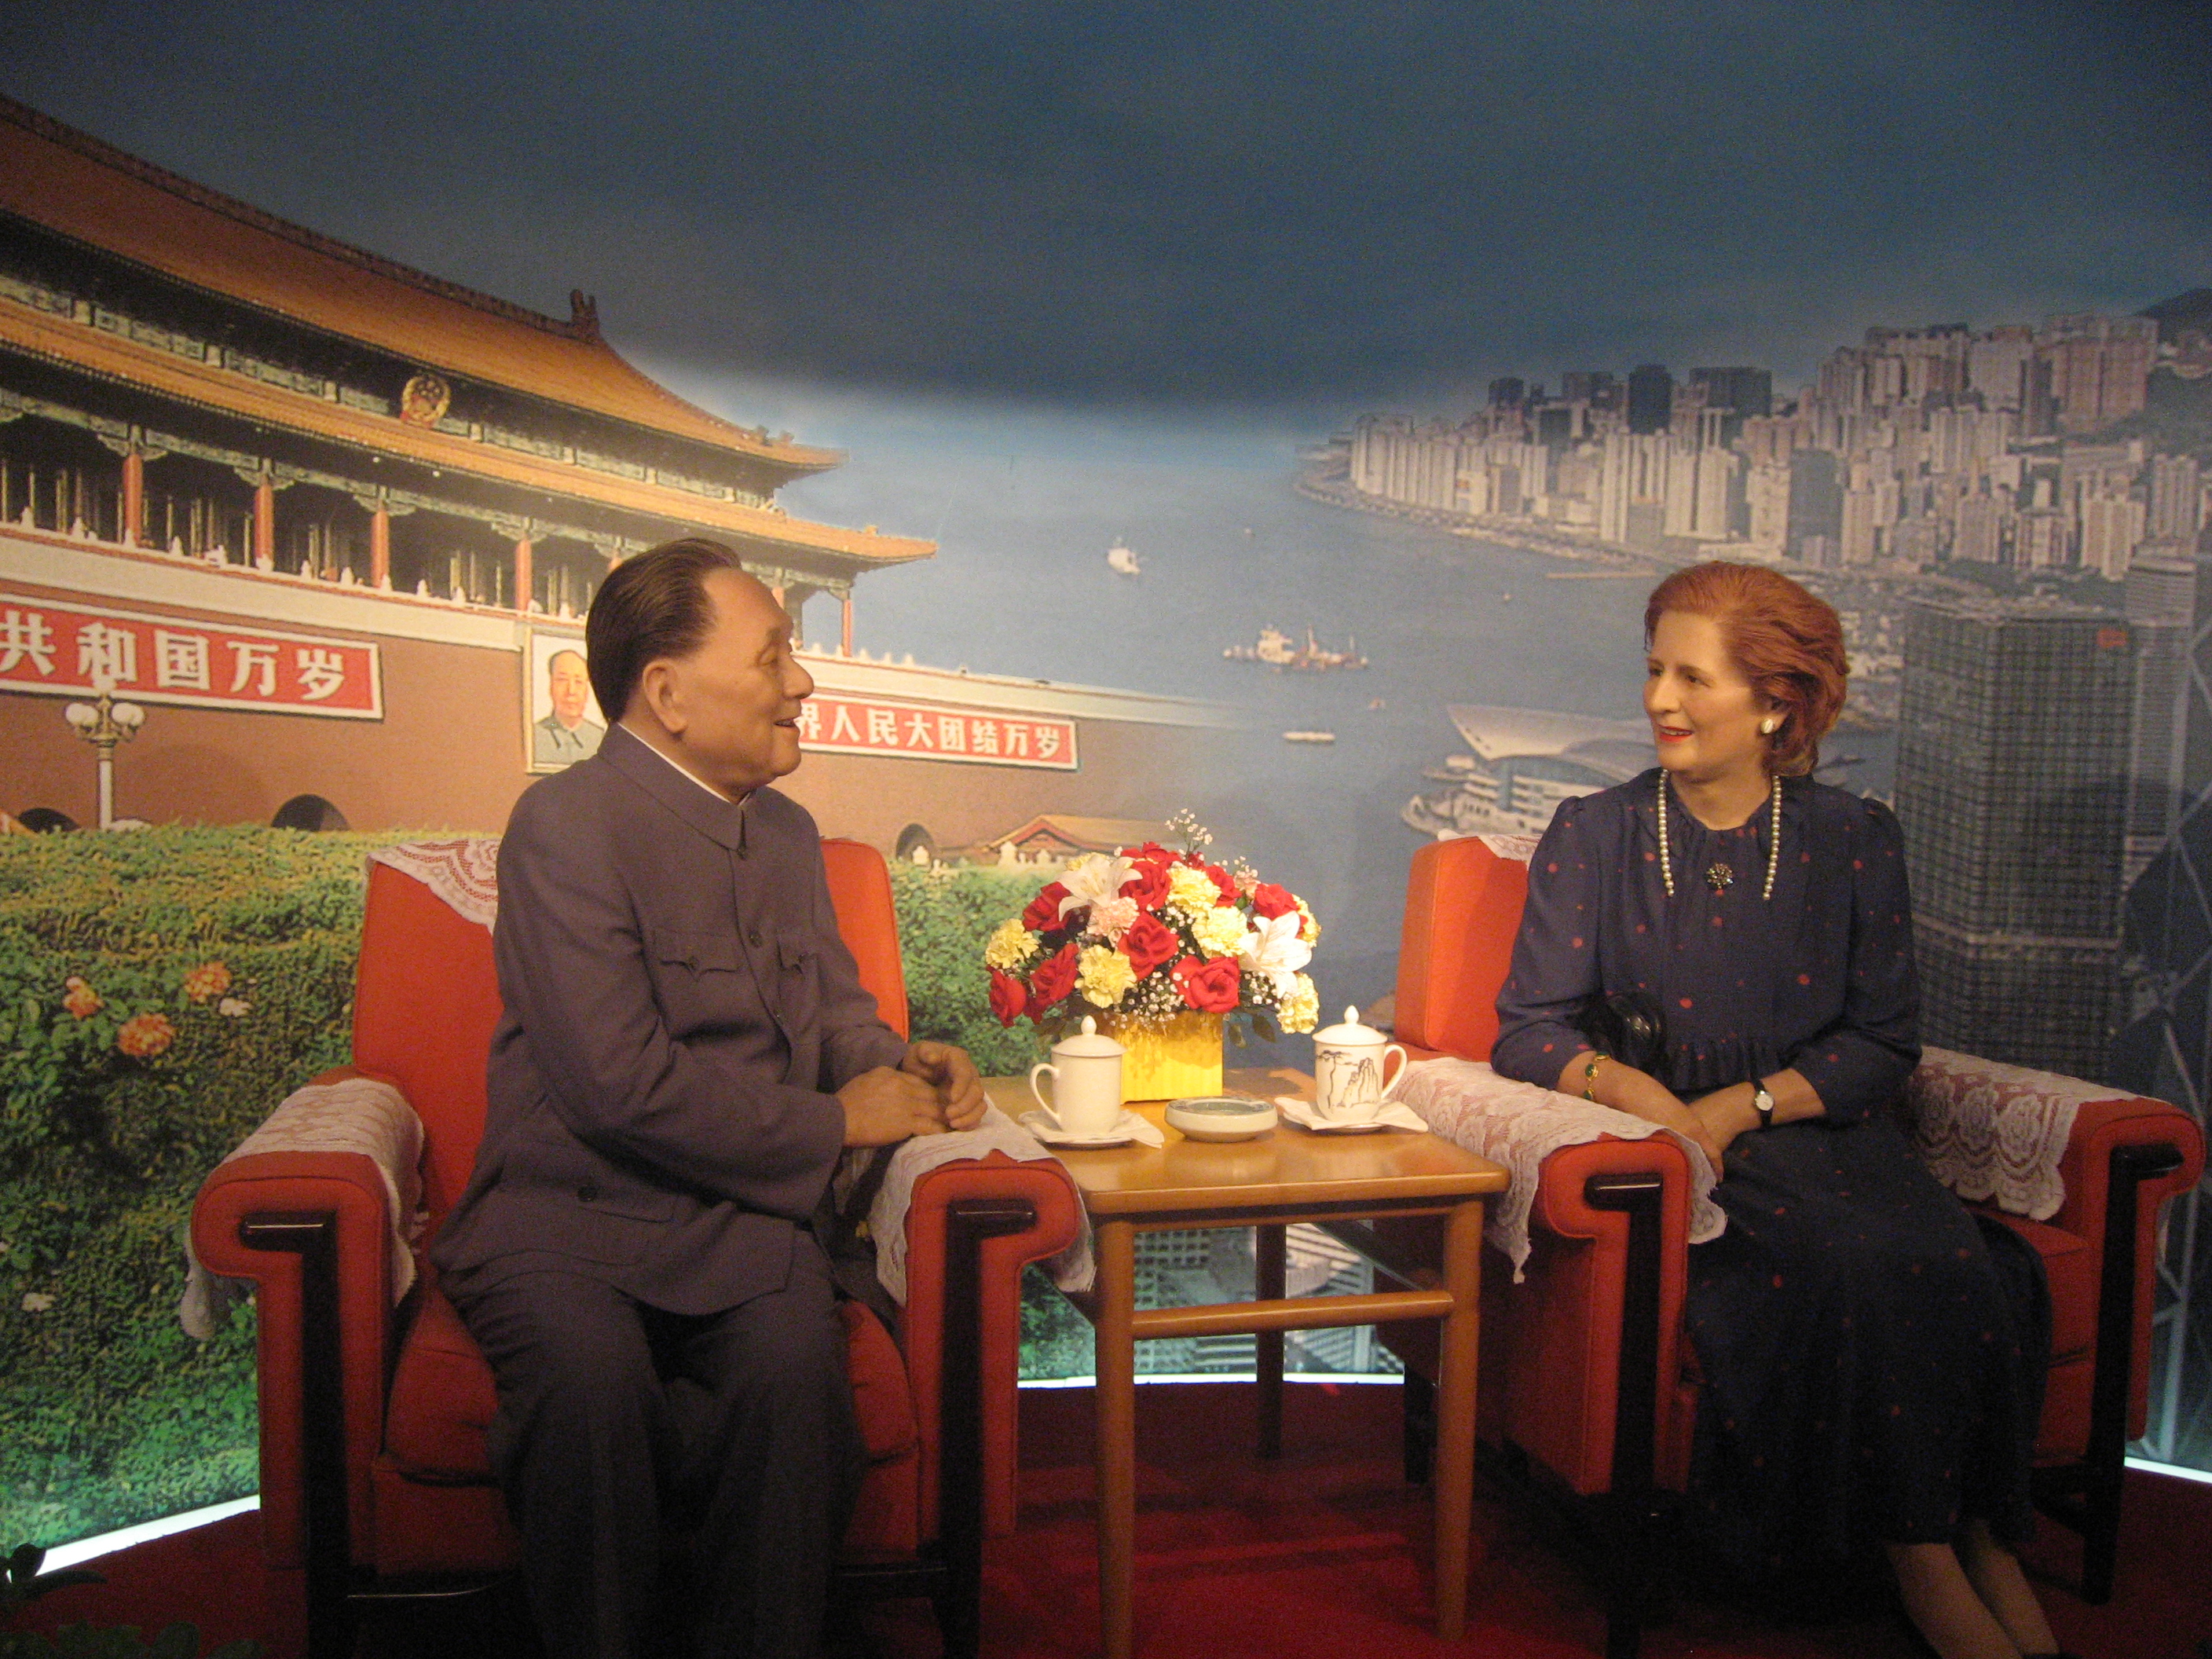 A replica of the historic negotiations in 1984 between Deng Xiaoping and Margaret Thatcher to return Hong Kong to the PRC.